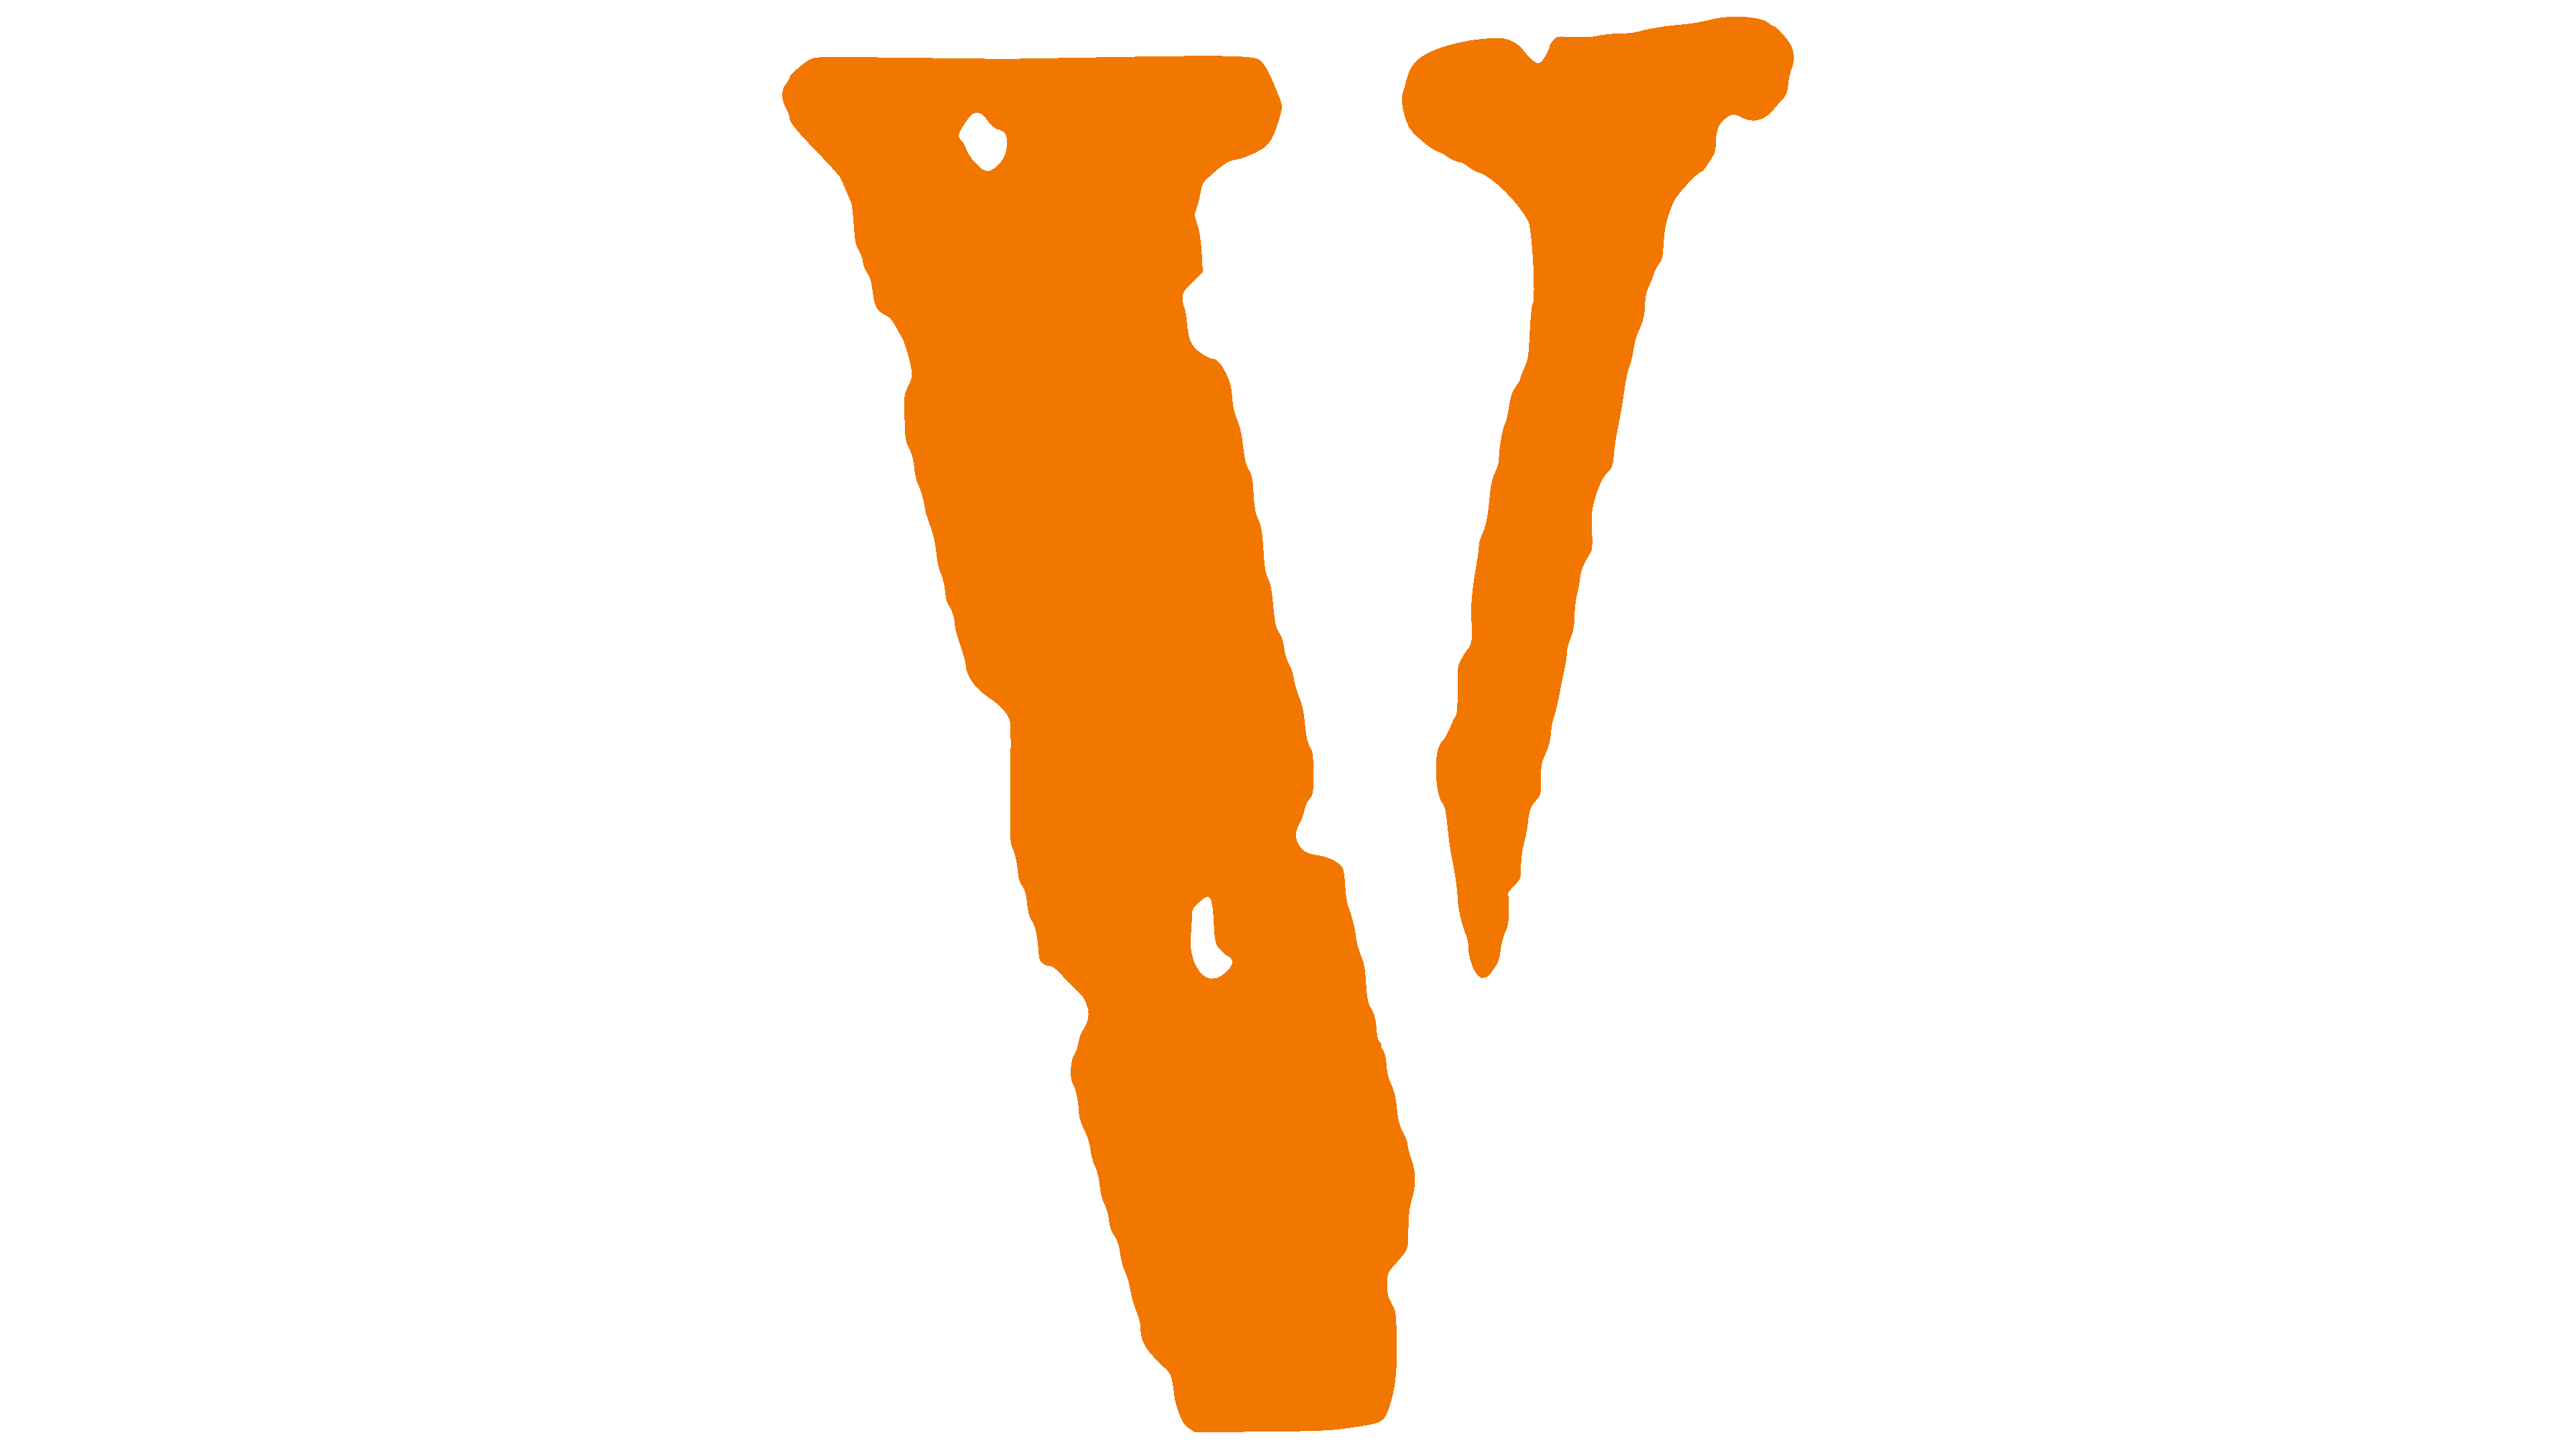 Vlone Logo And Symbol, Meaning, History, PNG, Brand, 54% OFF